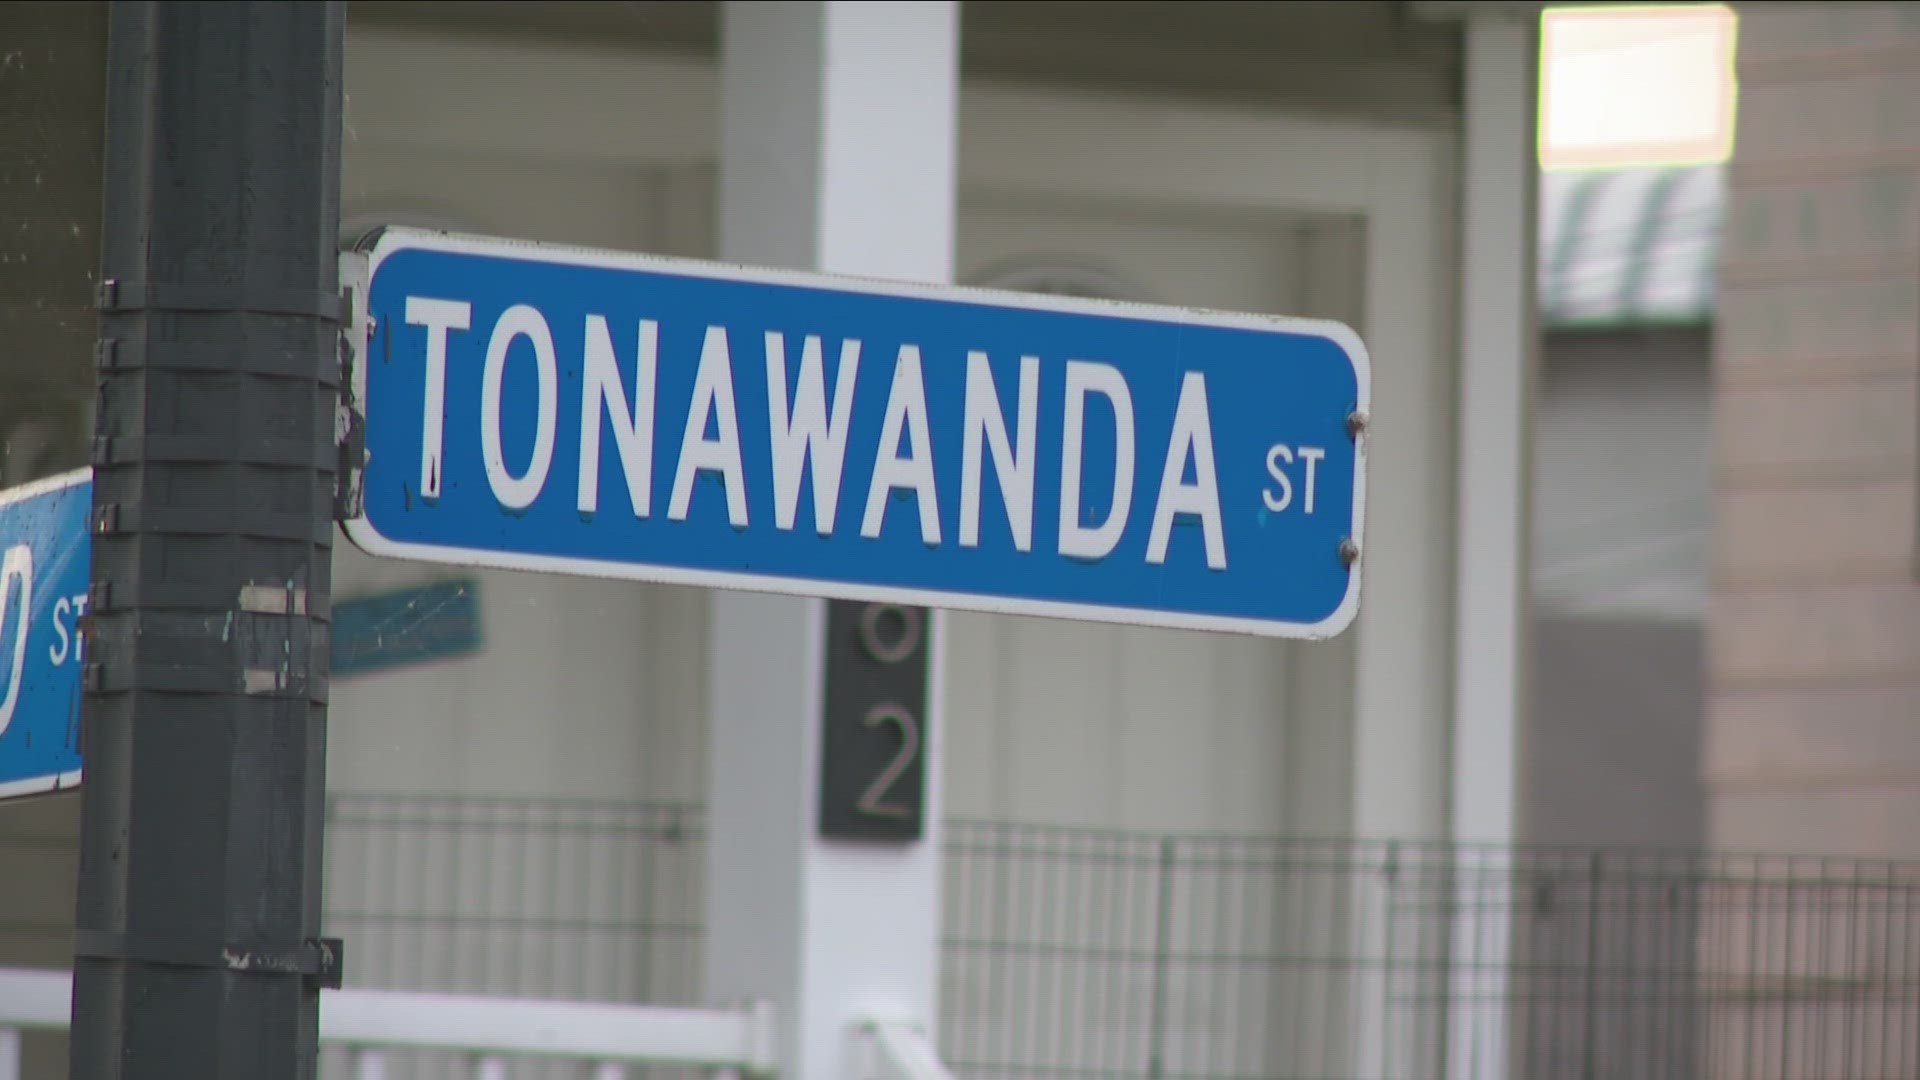 it was on the 500 BLOCK ON TONAWANDA STREET NEAR HERTEL AVENUE WHERE A MAN WAS THREATENING TO DIE BY SUICIDE. THE MAN WAS HOLDING A PELLET LONG GUN.